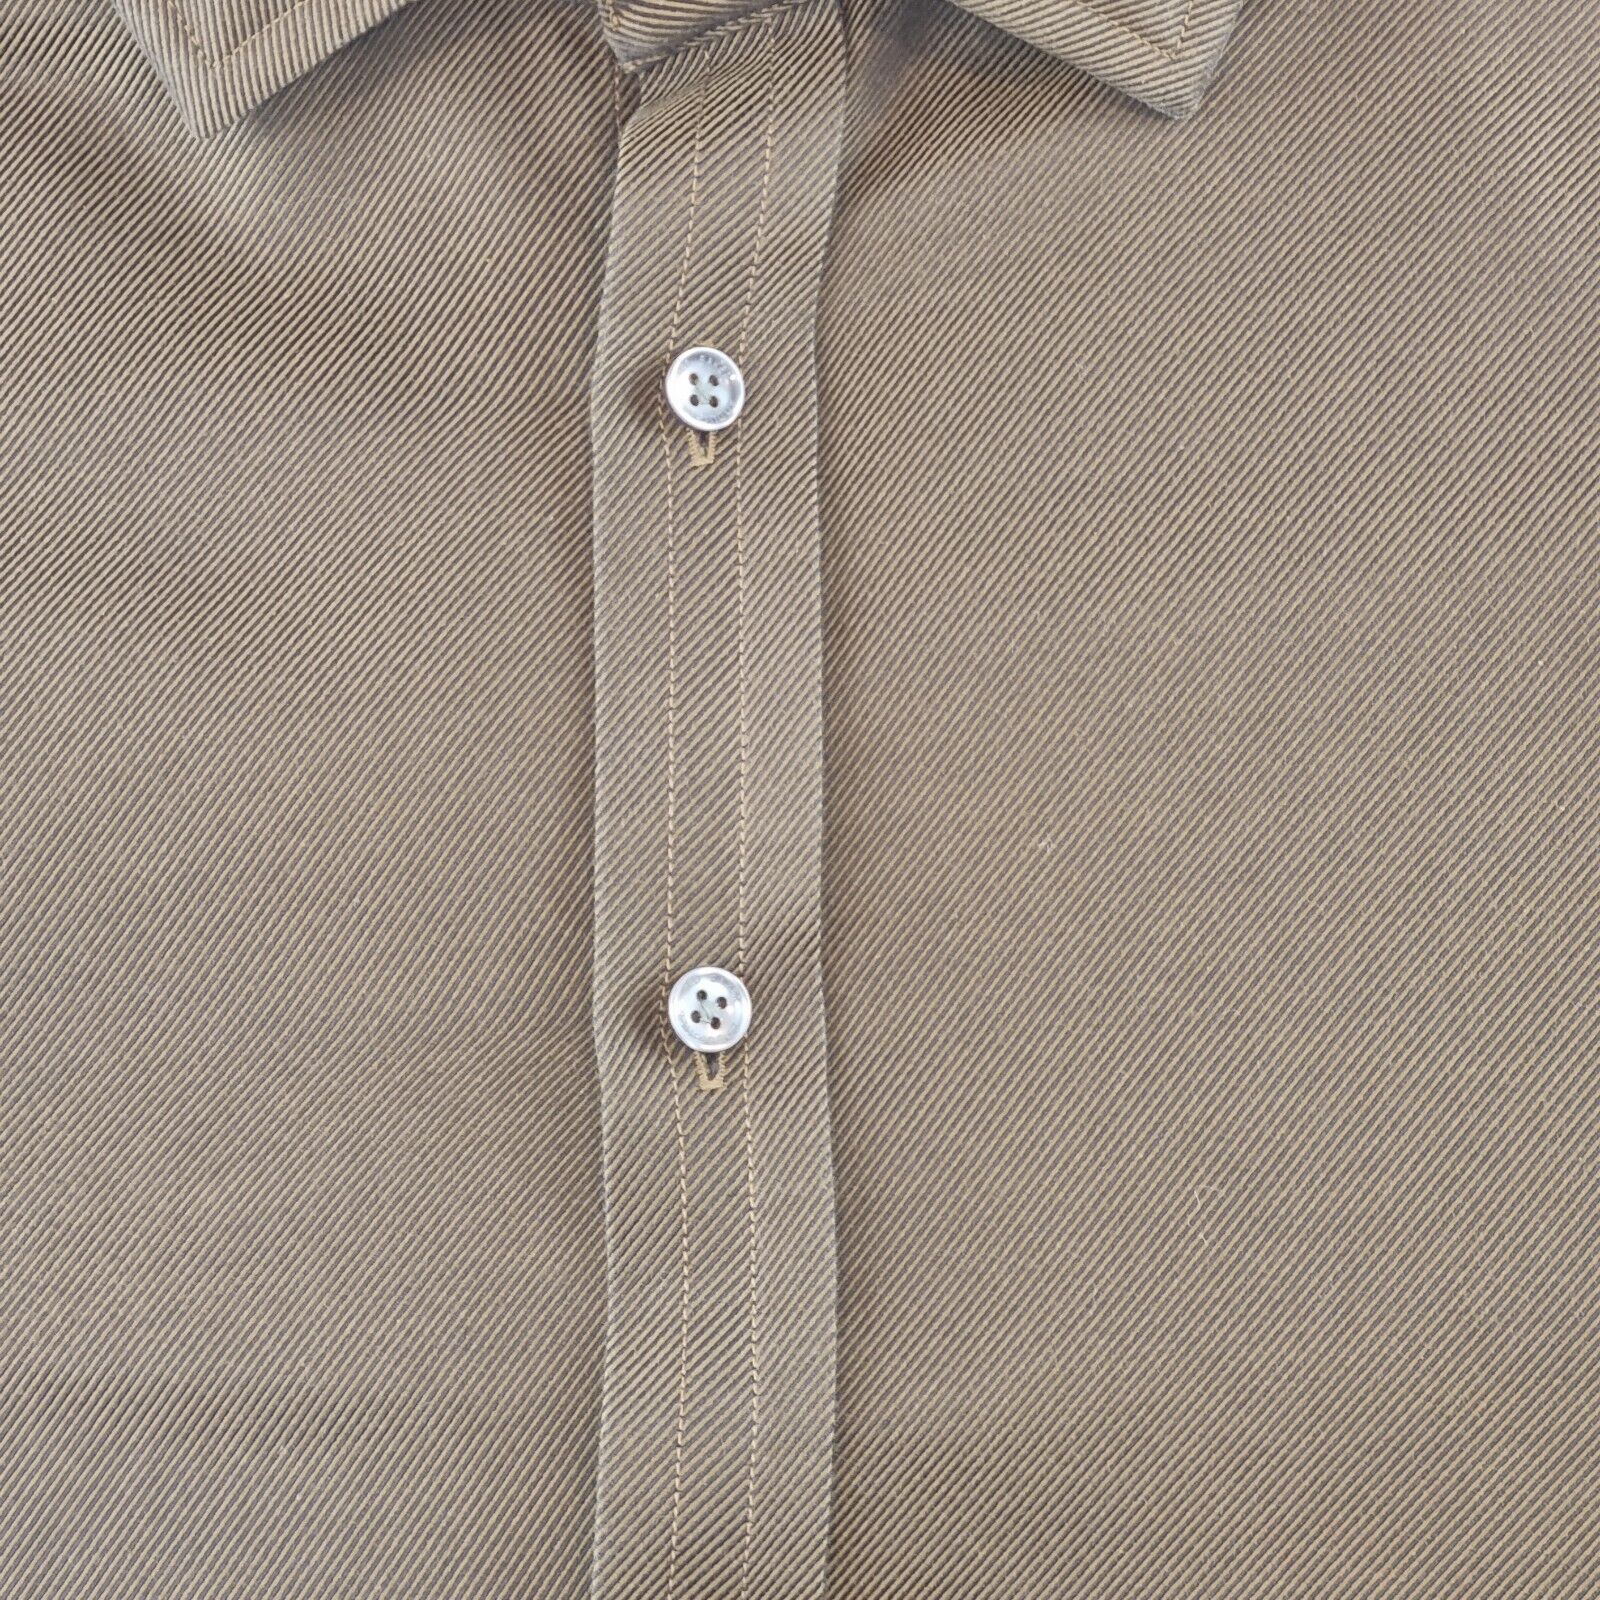 Mens Shirt Ted Baker Brown Button Up - Bonnie Lassio